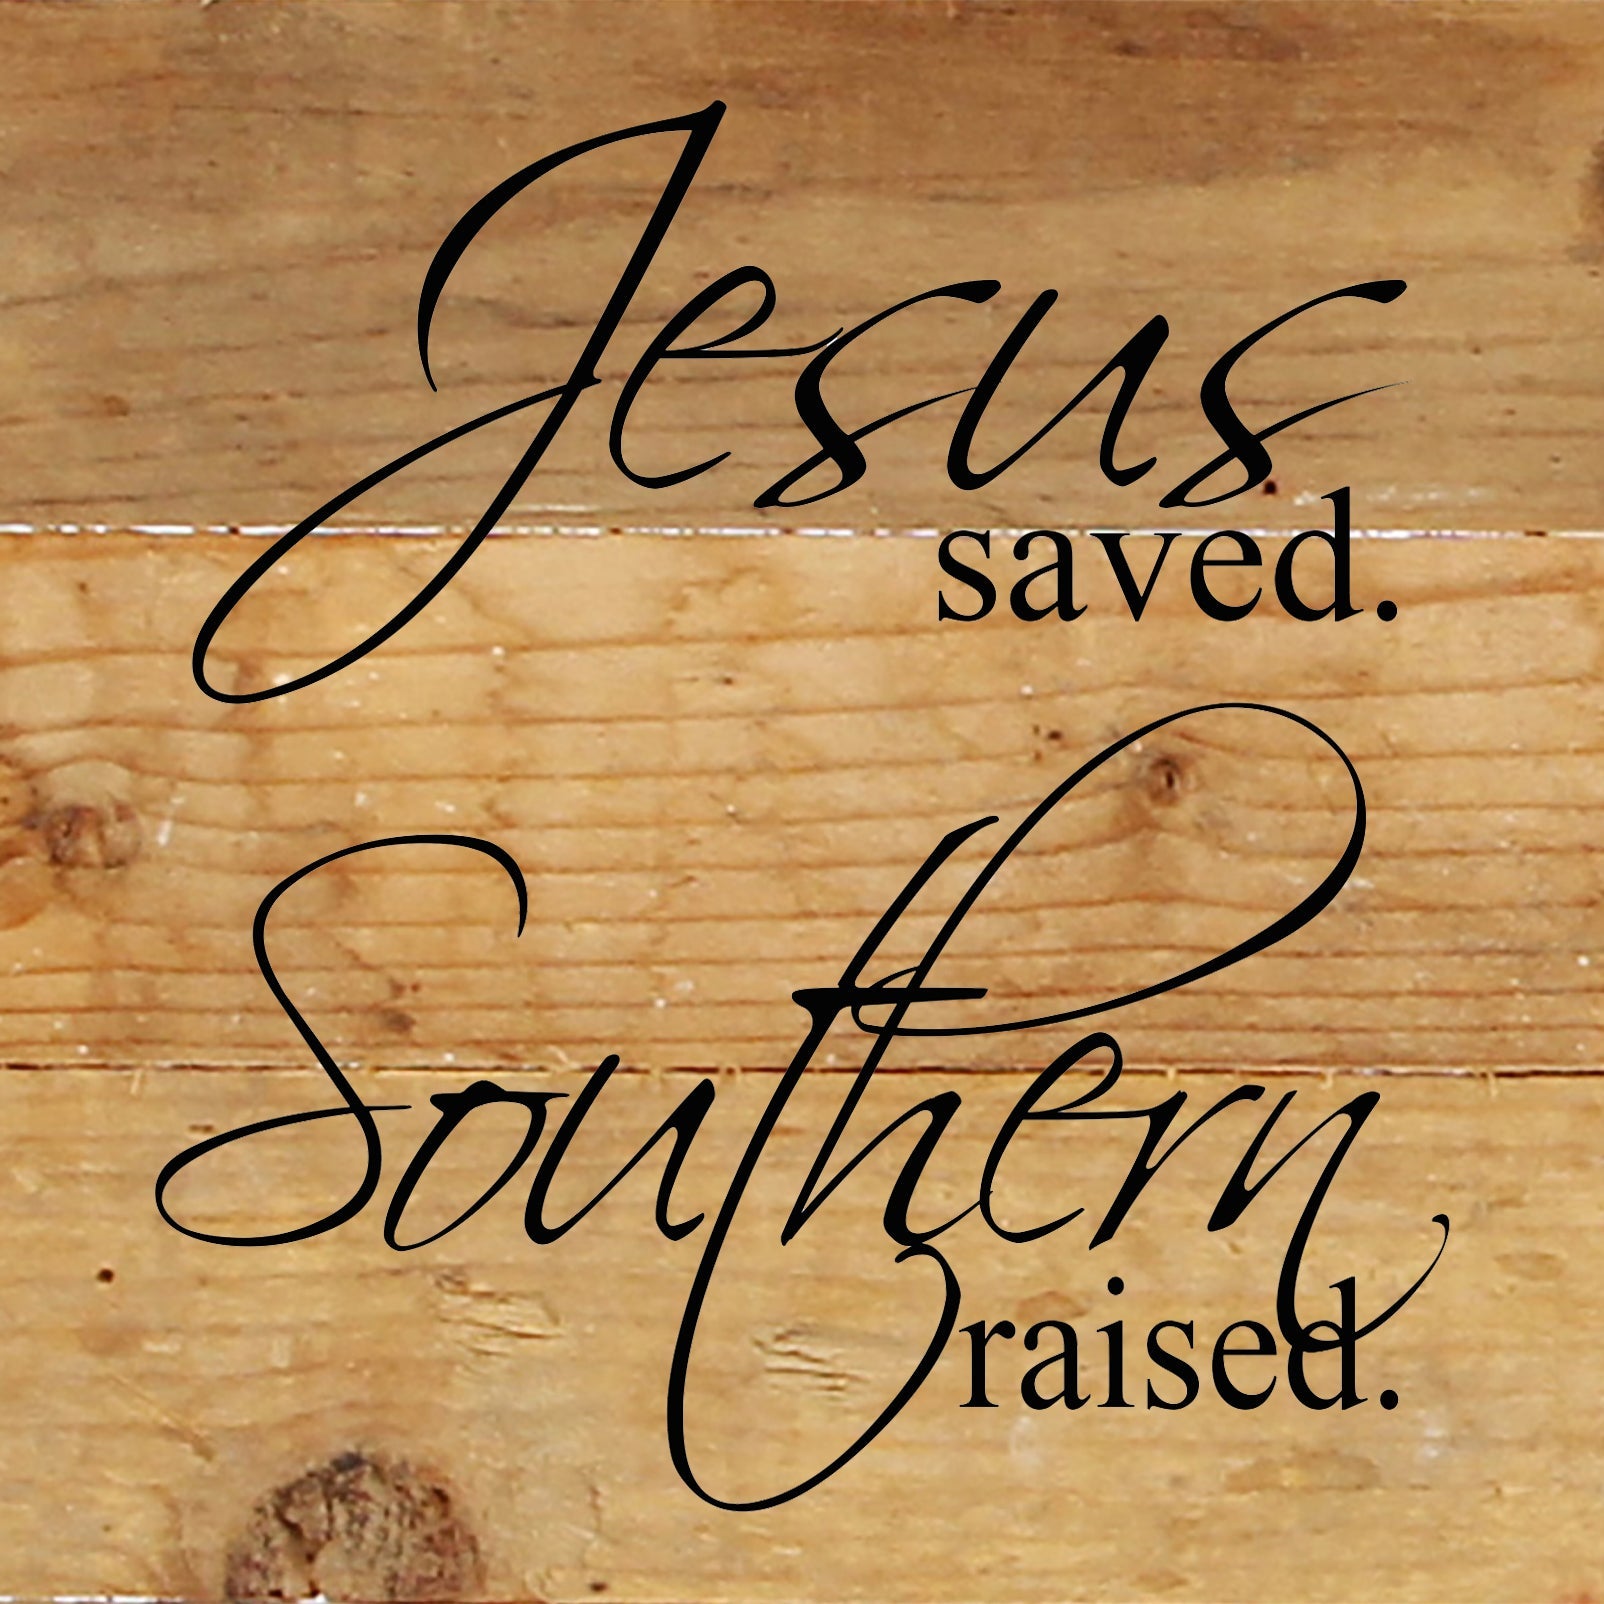 Jesus saved. Southern raised. / 6"x6" Reclaimed Wood Sign